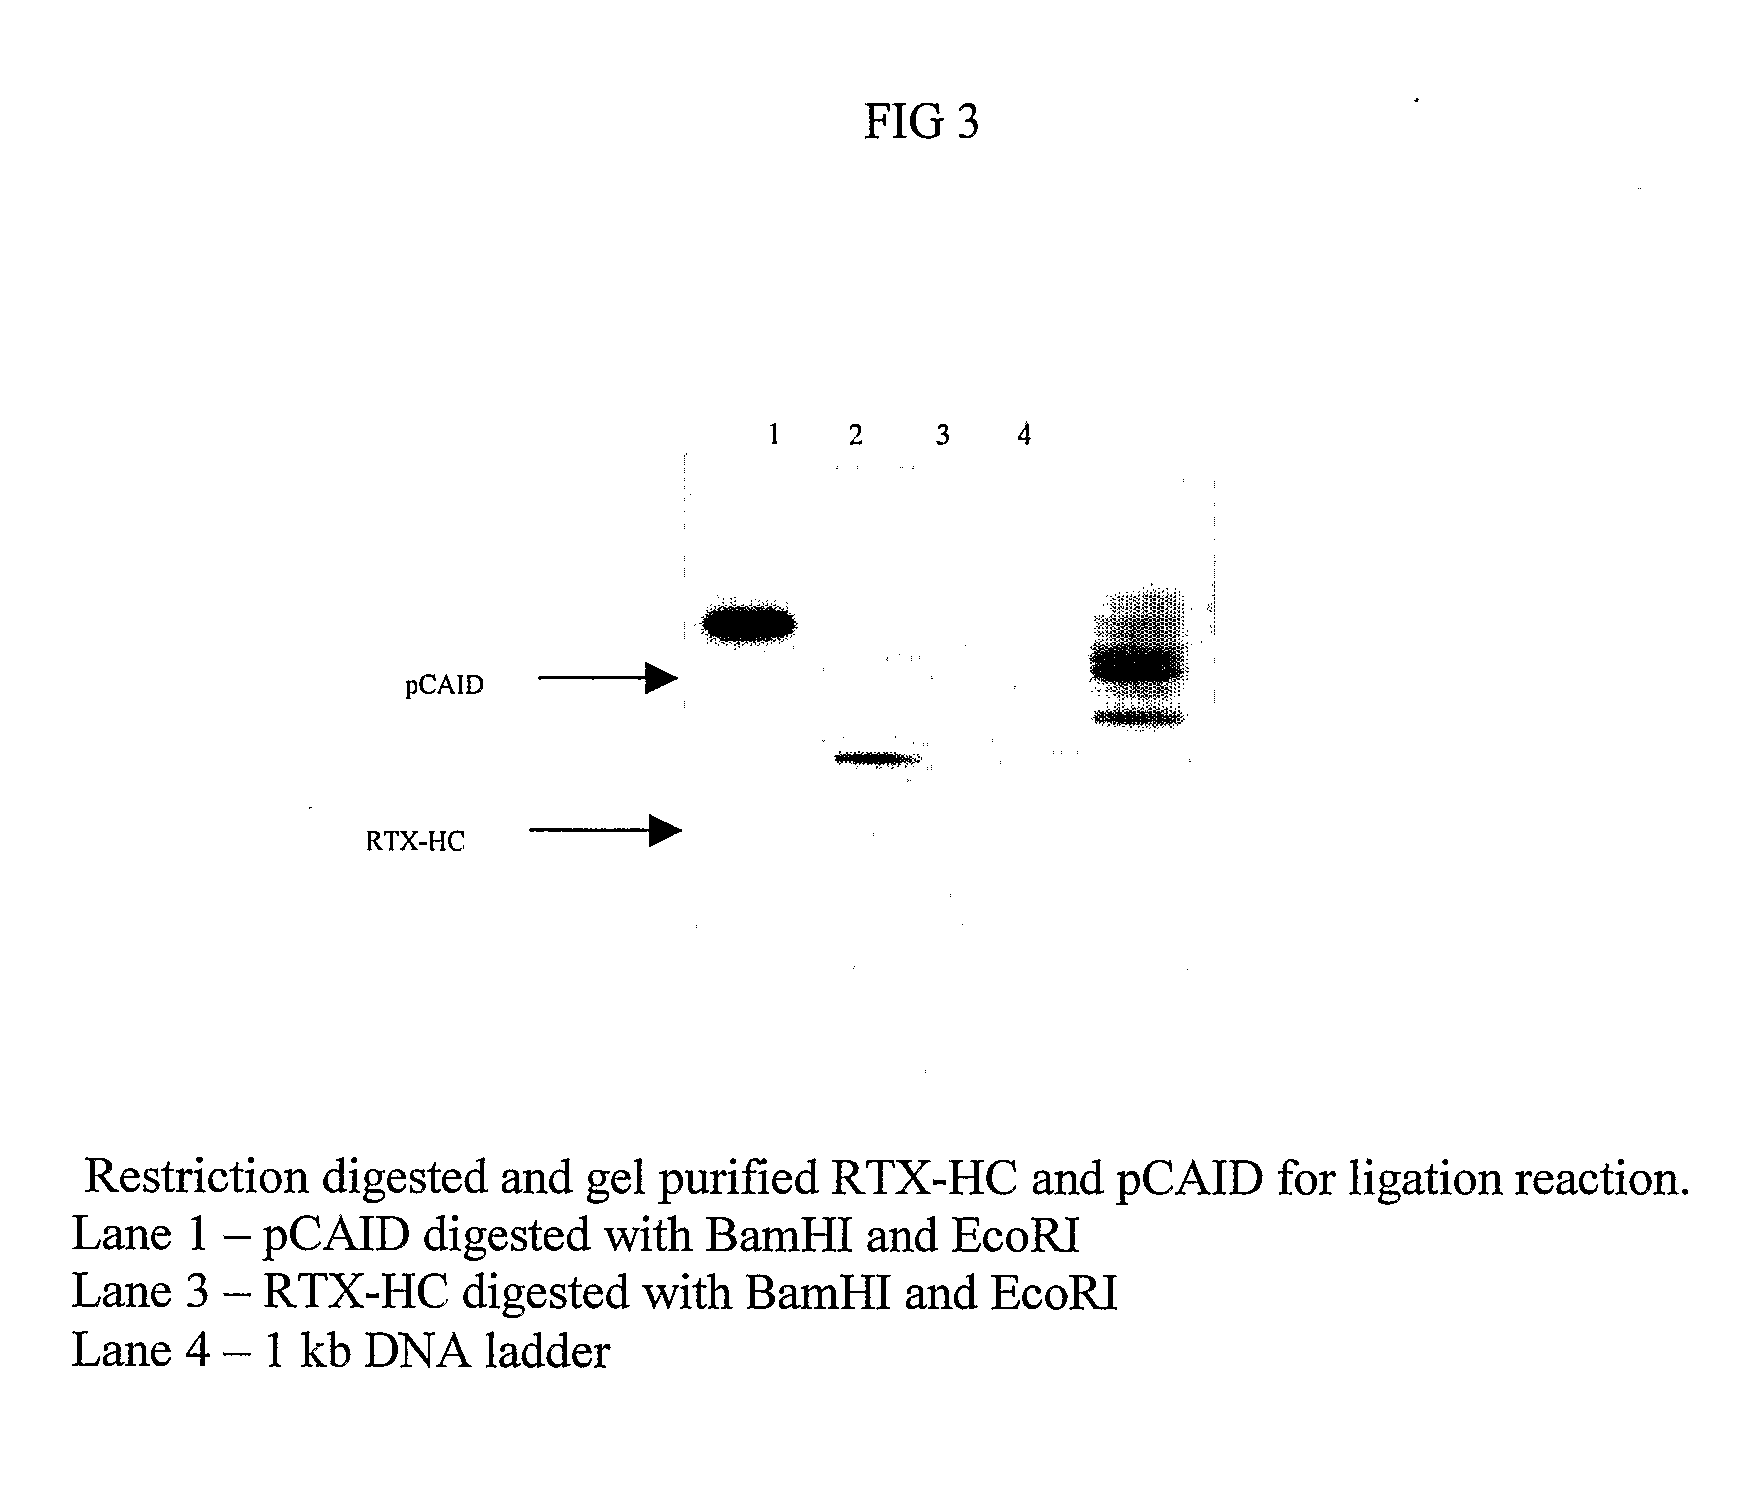 Method for the Production of a Monoclonal Antibody to CD20 for the Treatment of B-Cell Lymphoma